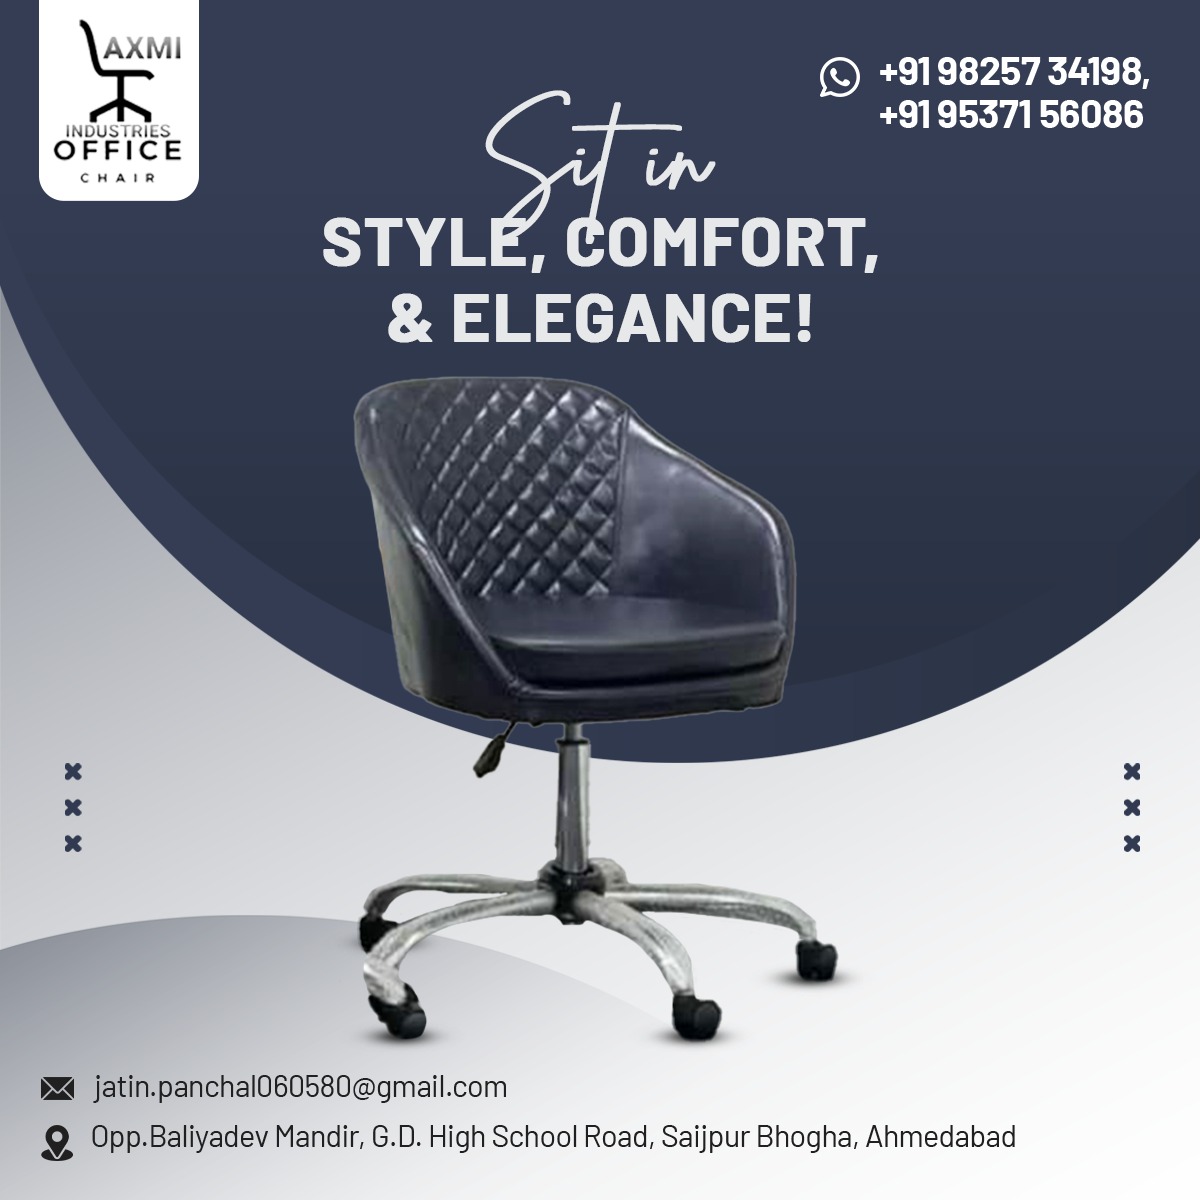 Experience ultimate relaxation with our luxurious and ergonomic chairs that redefine comfort. Sit back, relax, and indulge in blissful comfort. 

#ComfortableChairs #ChairManufacturer #chairforever #chairforsale #LuxuryChairs #laxmiindustries